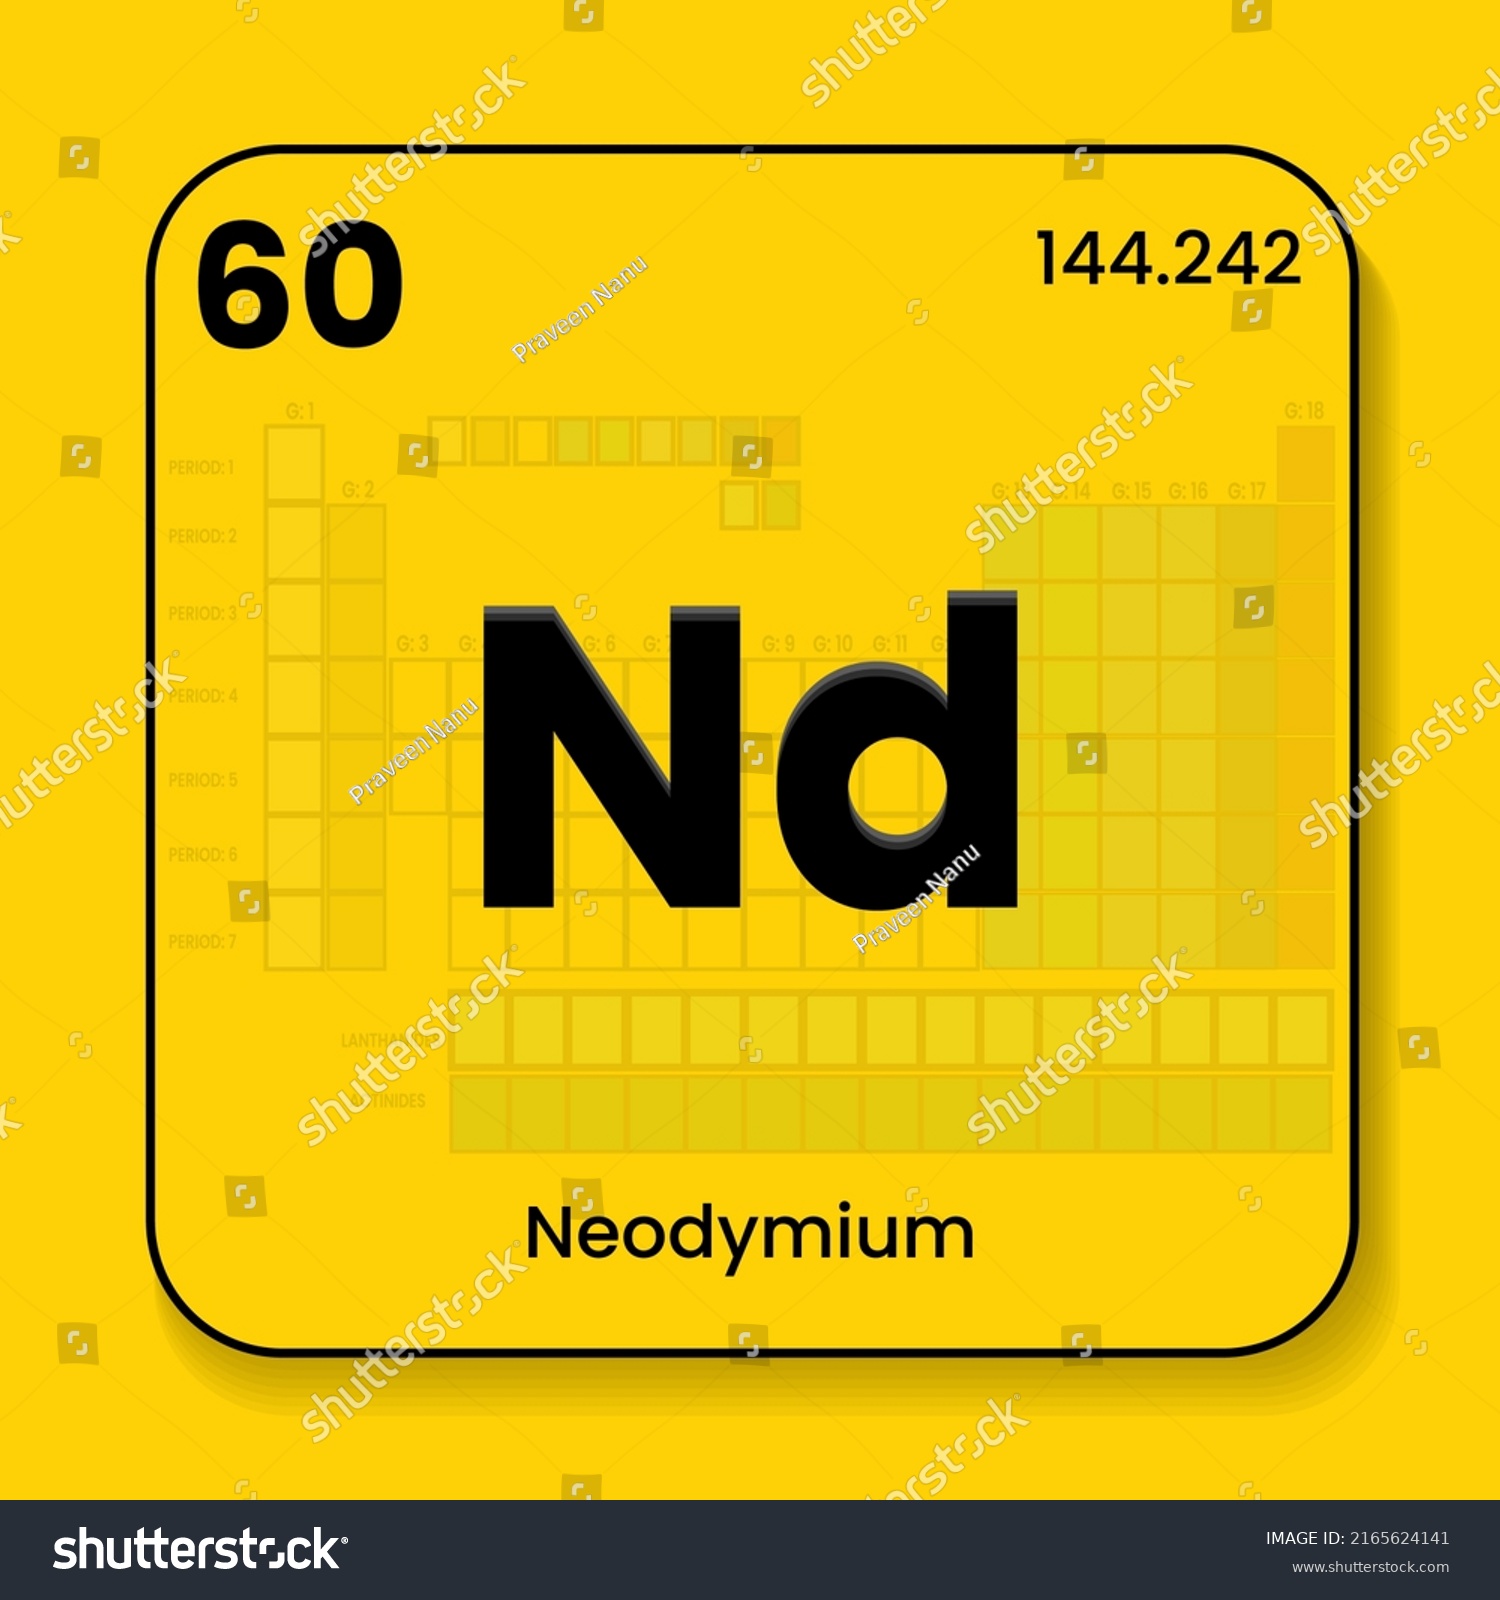 Neodymium Nd Periodic Table Elements Name Stock Vector (Royalty Free ...